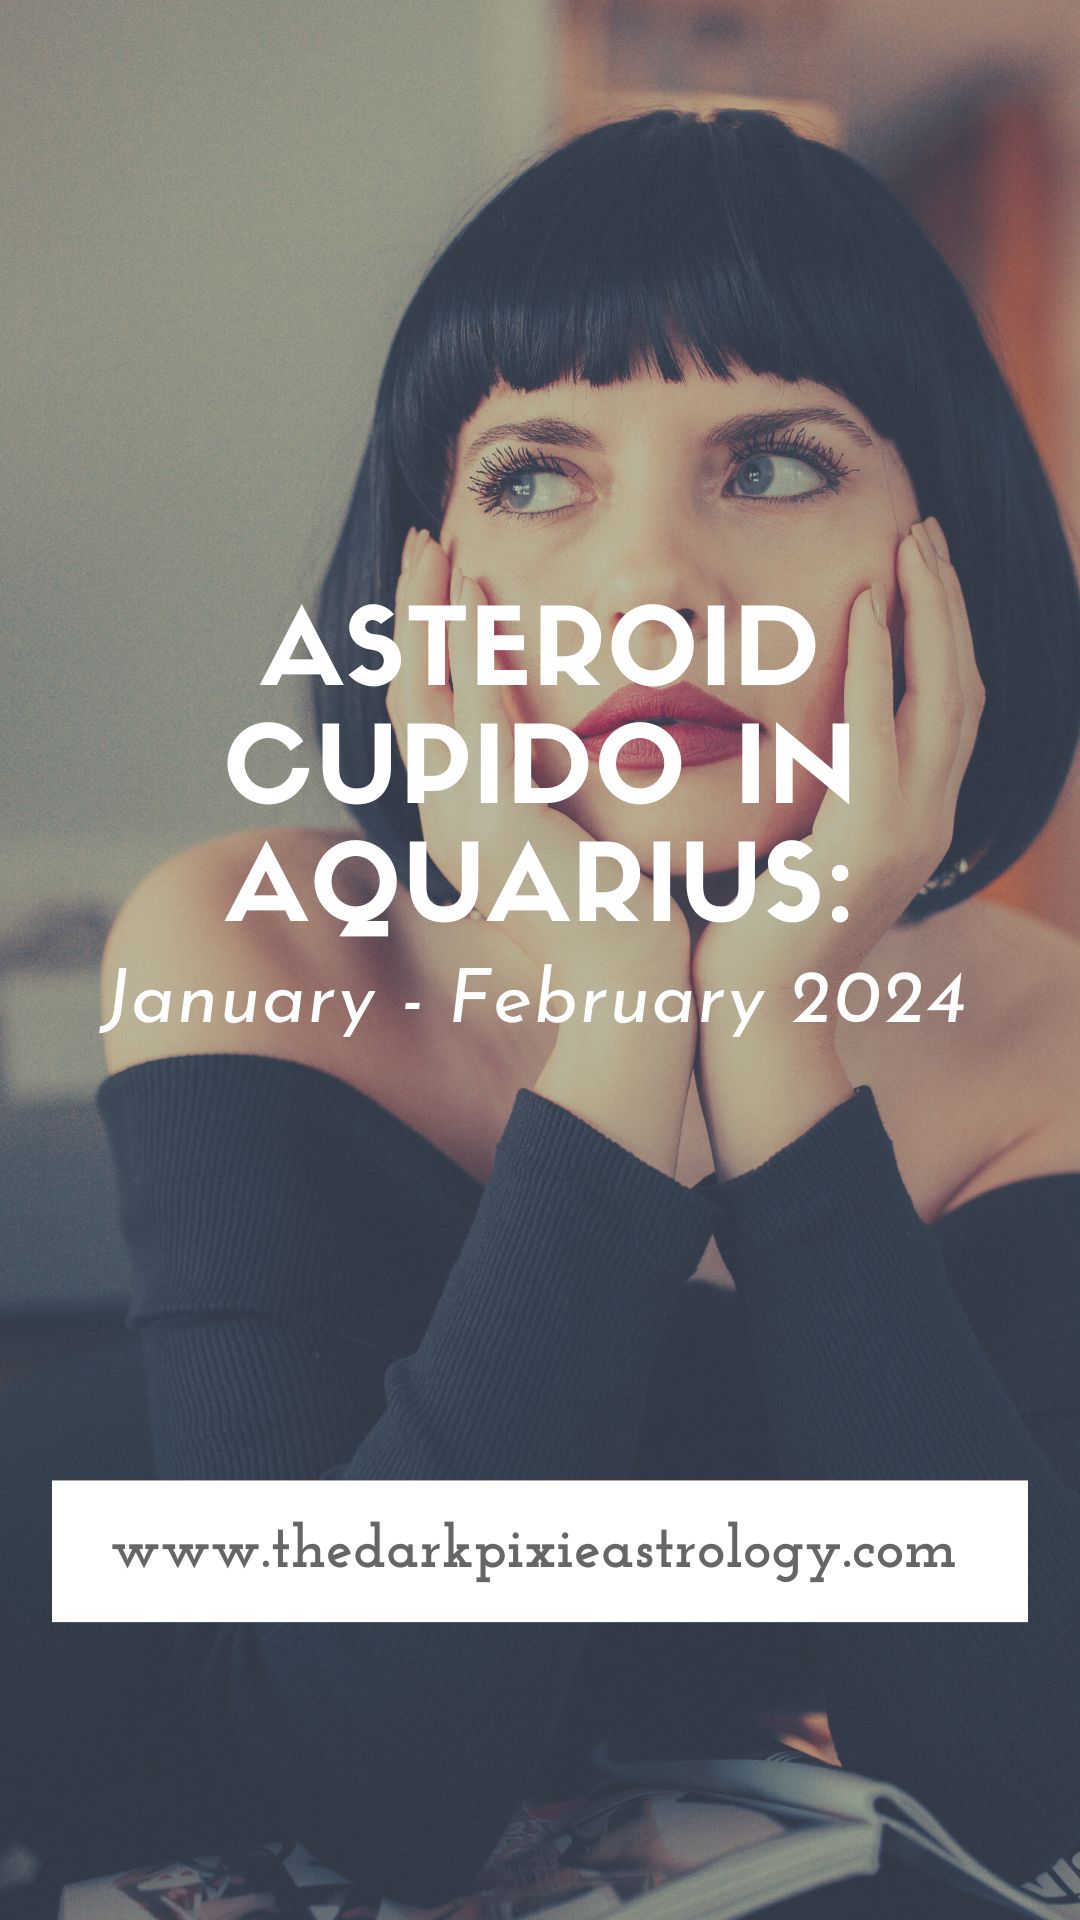 Asteroid Cupido in Aquarius: January - February 2024 - The Dark Pixie Astrology